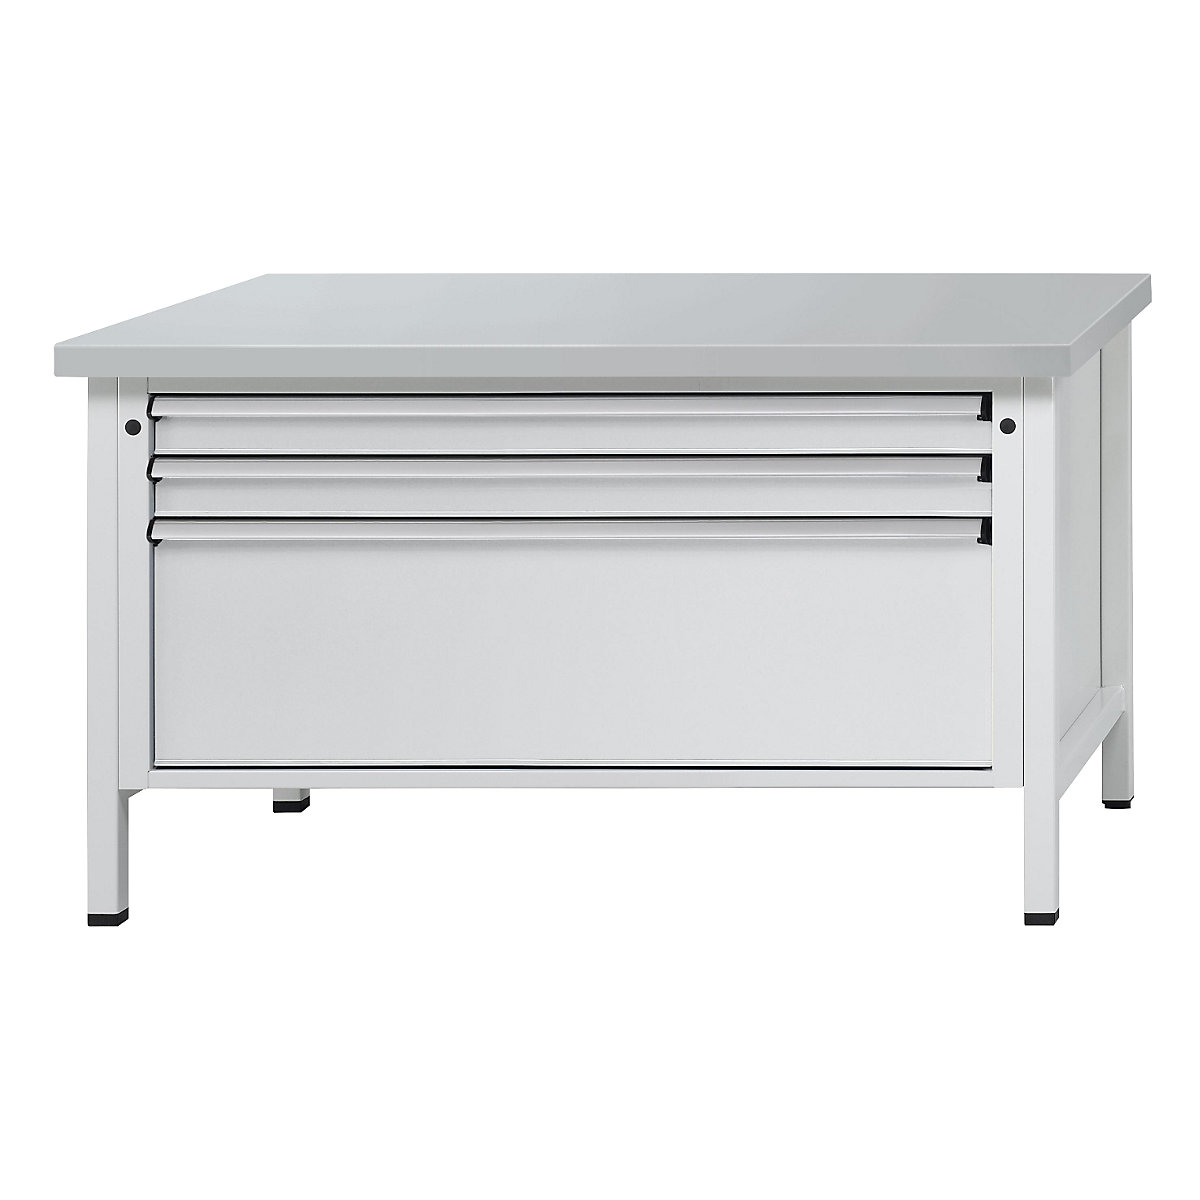 Workbench with XL/XXL drawers, frame construction – ANKE, width 1500 mm, 3 drawers, sheet steel covered worktop, front in light grey-10